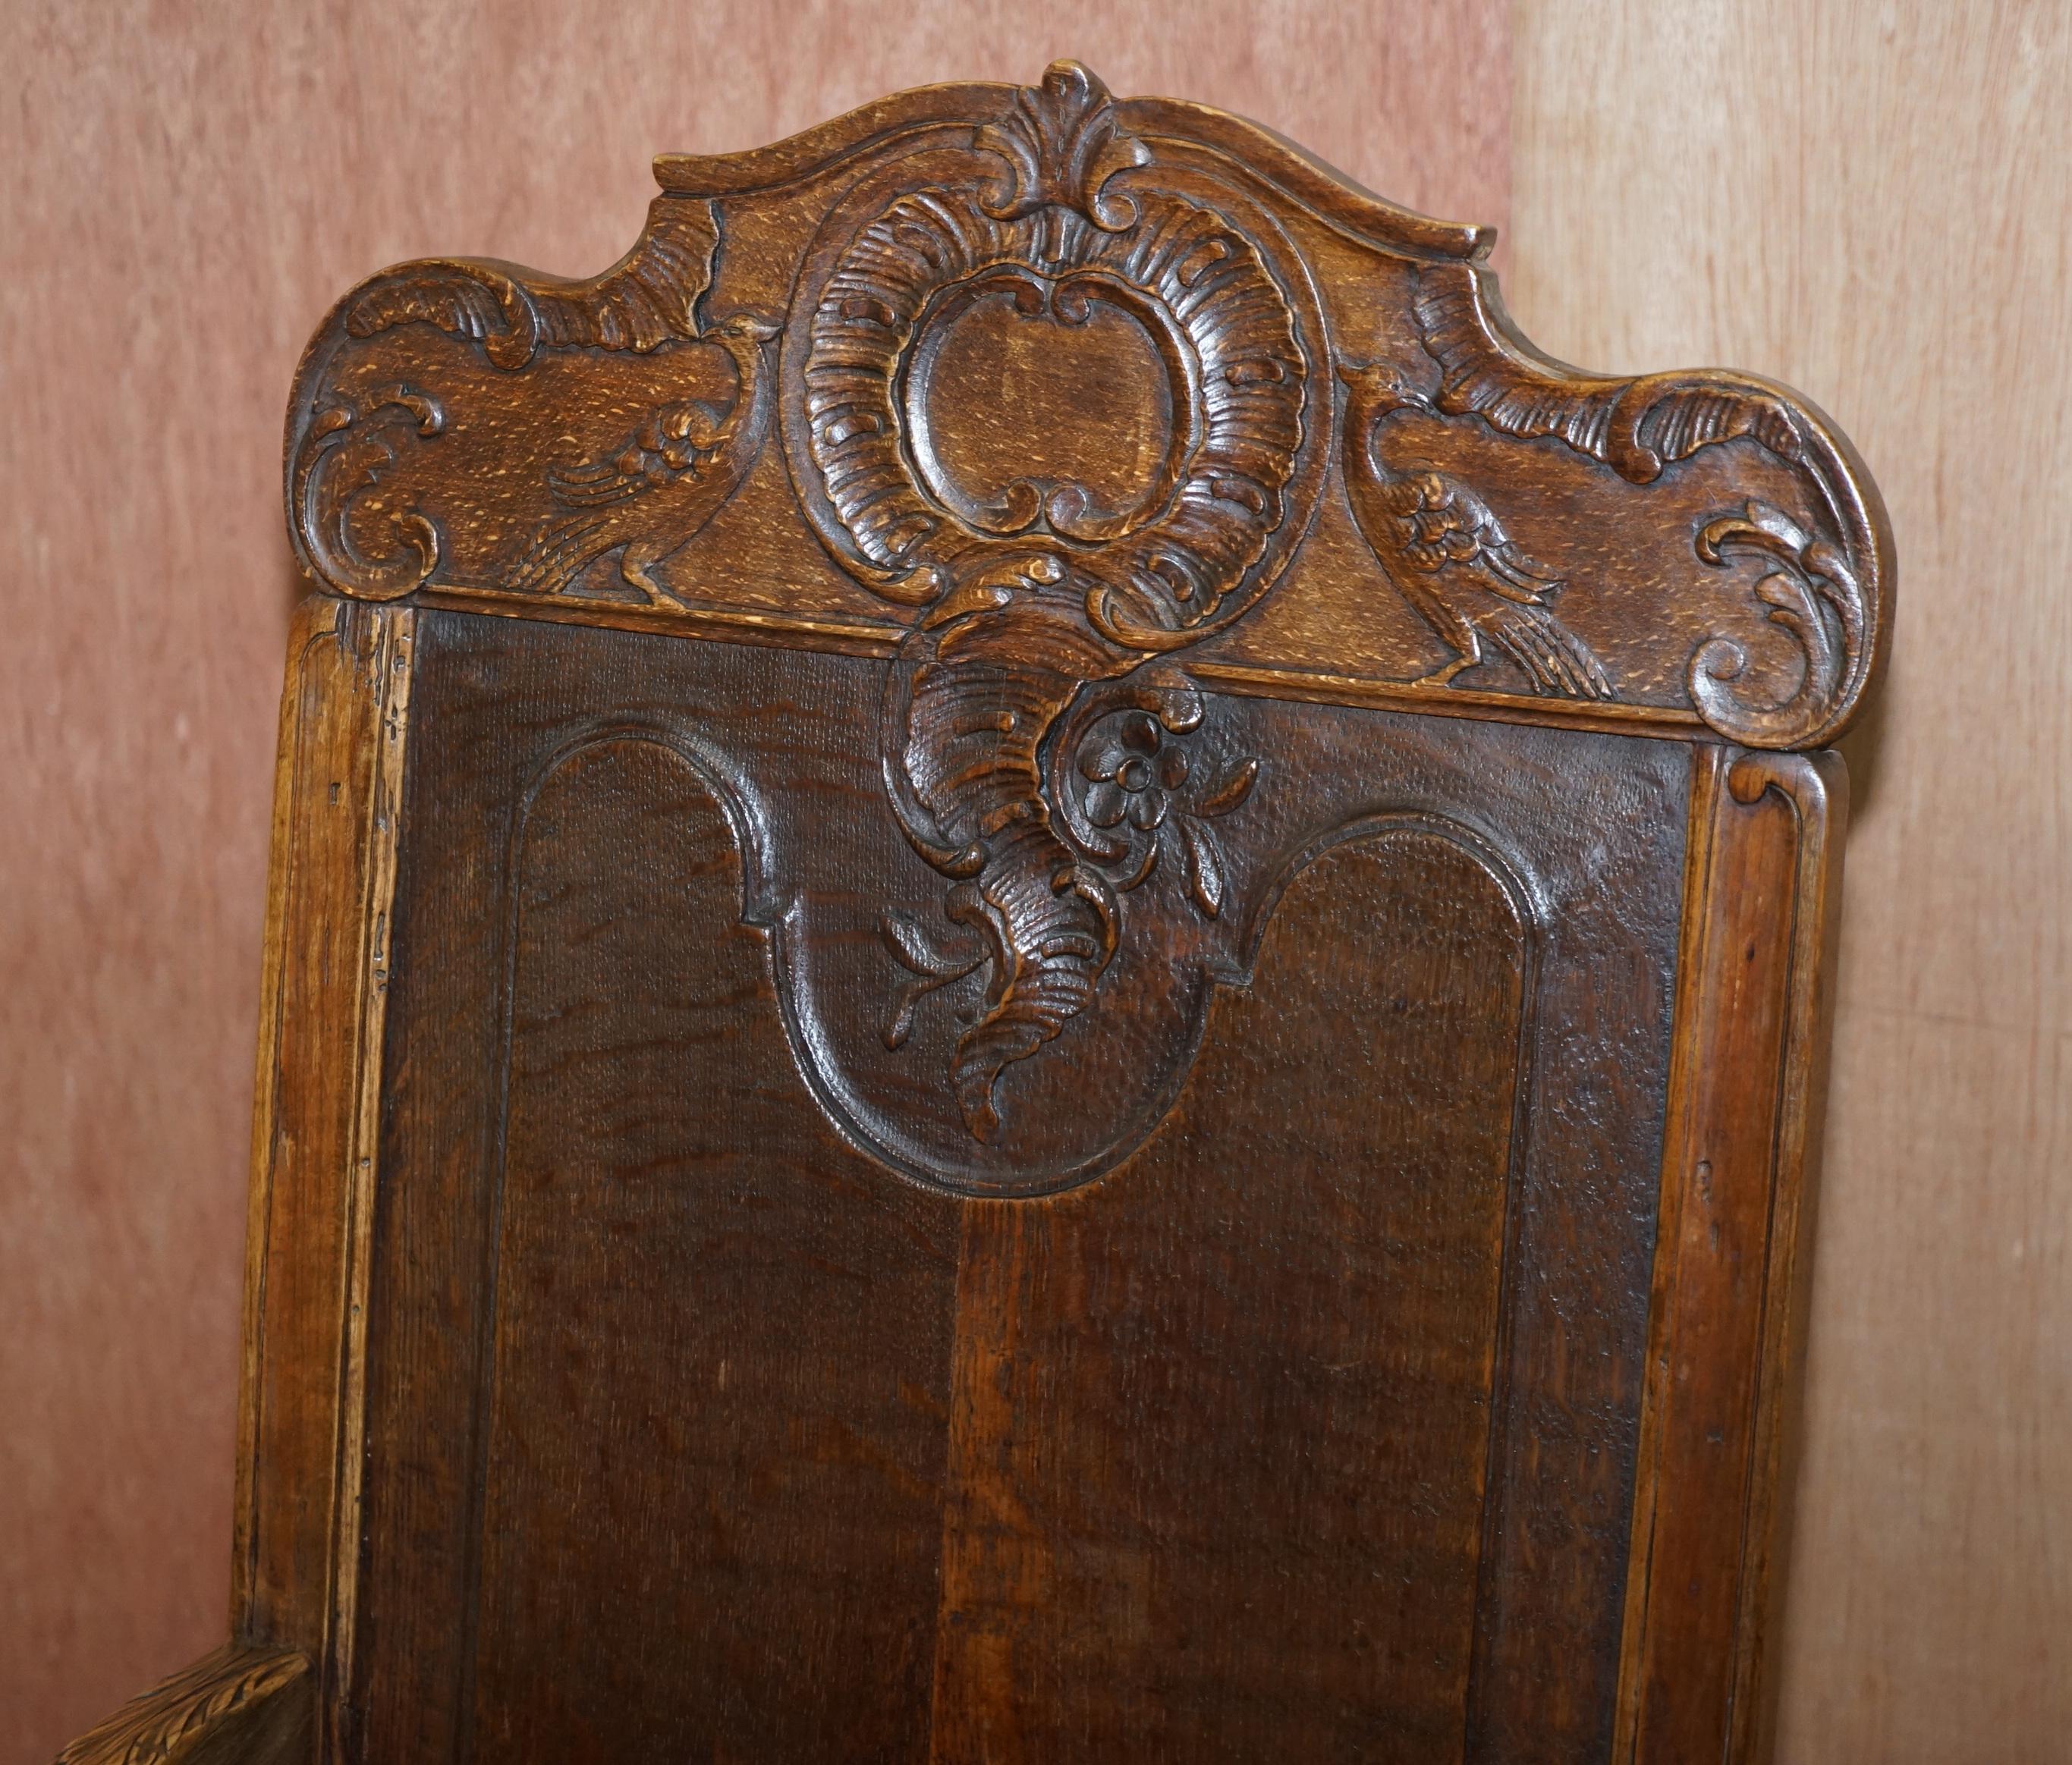 Belgian Lovely Original 18th Century Herve Liege Belgium Carved Wood Armchair Wainscot For Sale